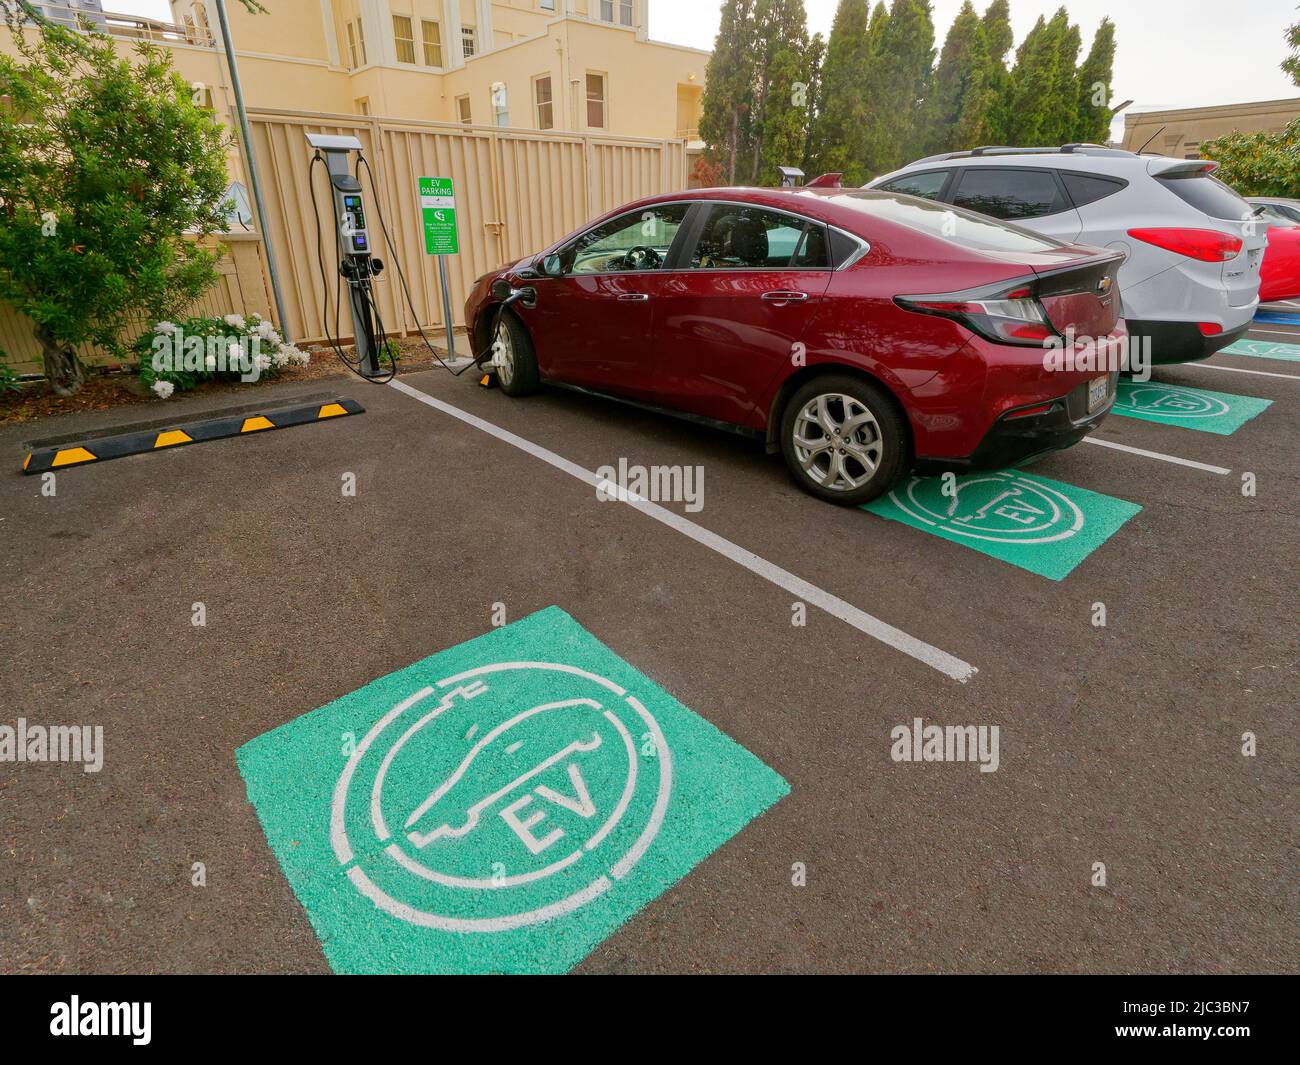 In Ashland, Oregon, the hotel Ashland Springs provides four charging stations for electric vehicles. Symbol on parking space reserved for the electric cars (Chevrolet Volt seen charging) Stock Photo